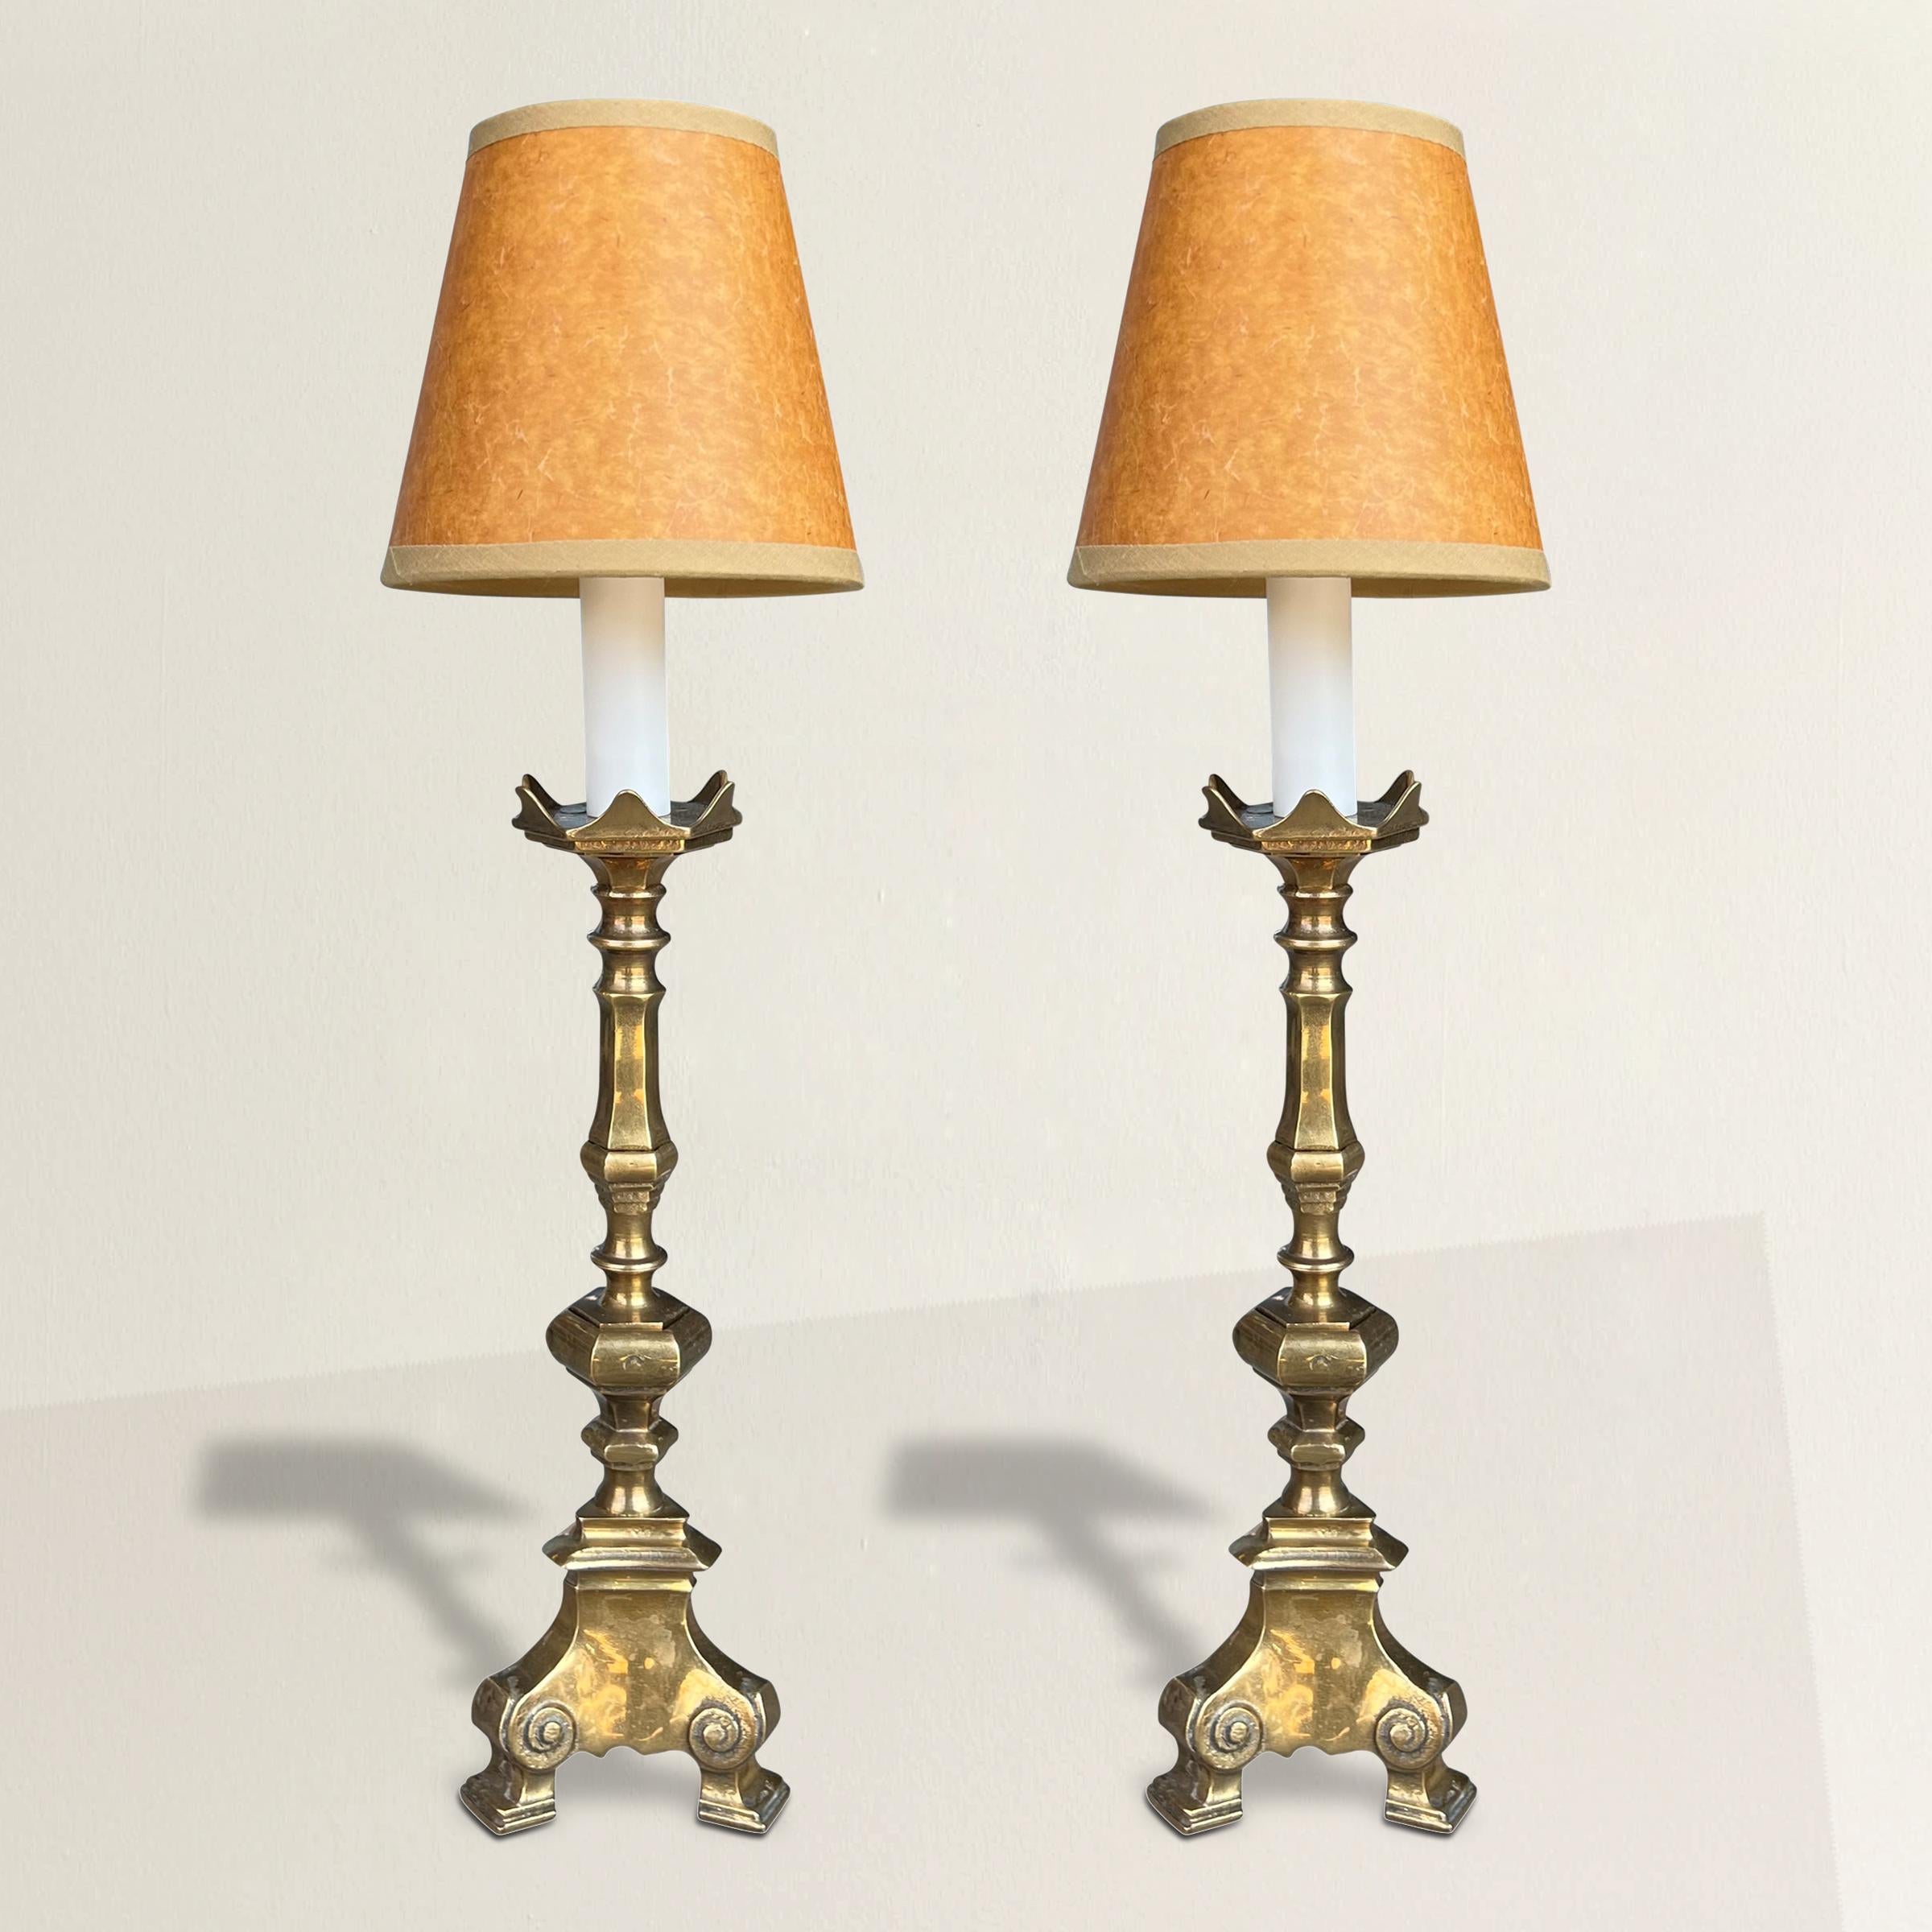 Step into the allure of the past with this pair of 19th-century French bronze candlesticks, thoughtfully transformed into radiant lamps. Electrified with precision, their once-candlelit elegance now casts a soft glow through delicate paper shades.